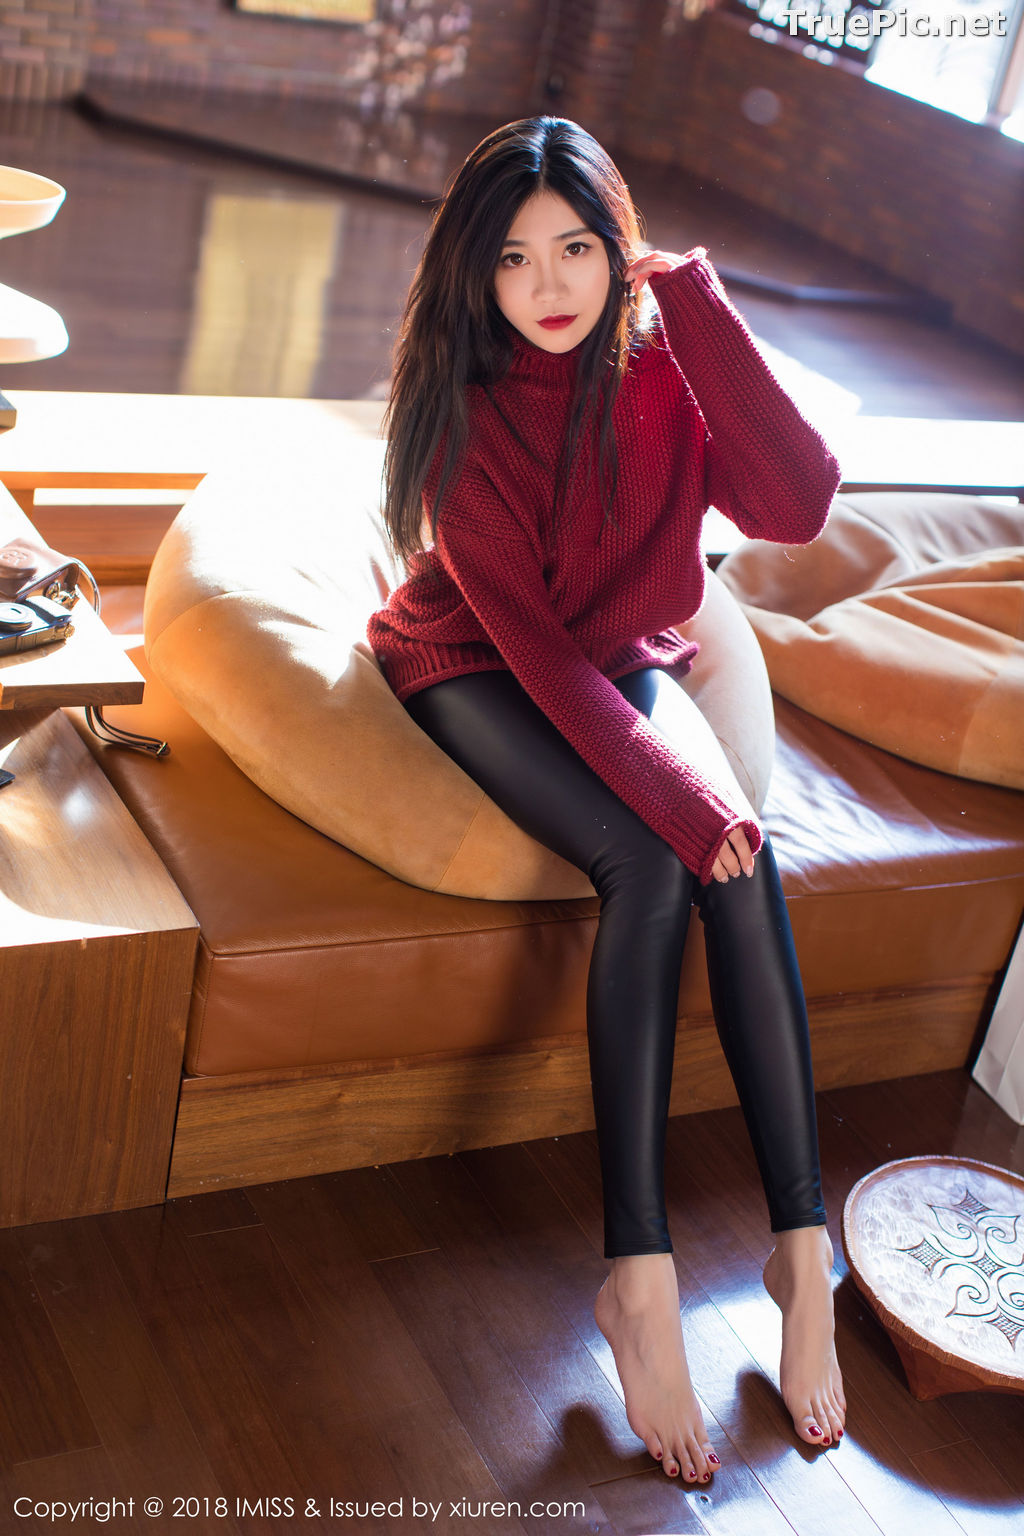 Image IMISS Vol.239 - Chinese Model - Sabrina (Xu Nuo 许诺) - Office Girl - TruePic.net - Picture-57